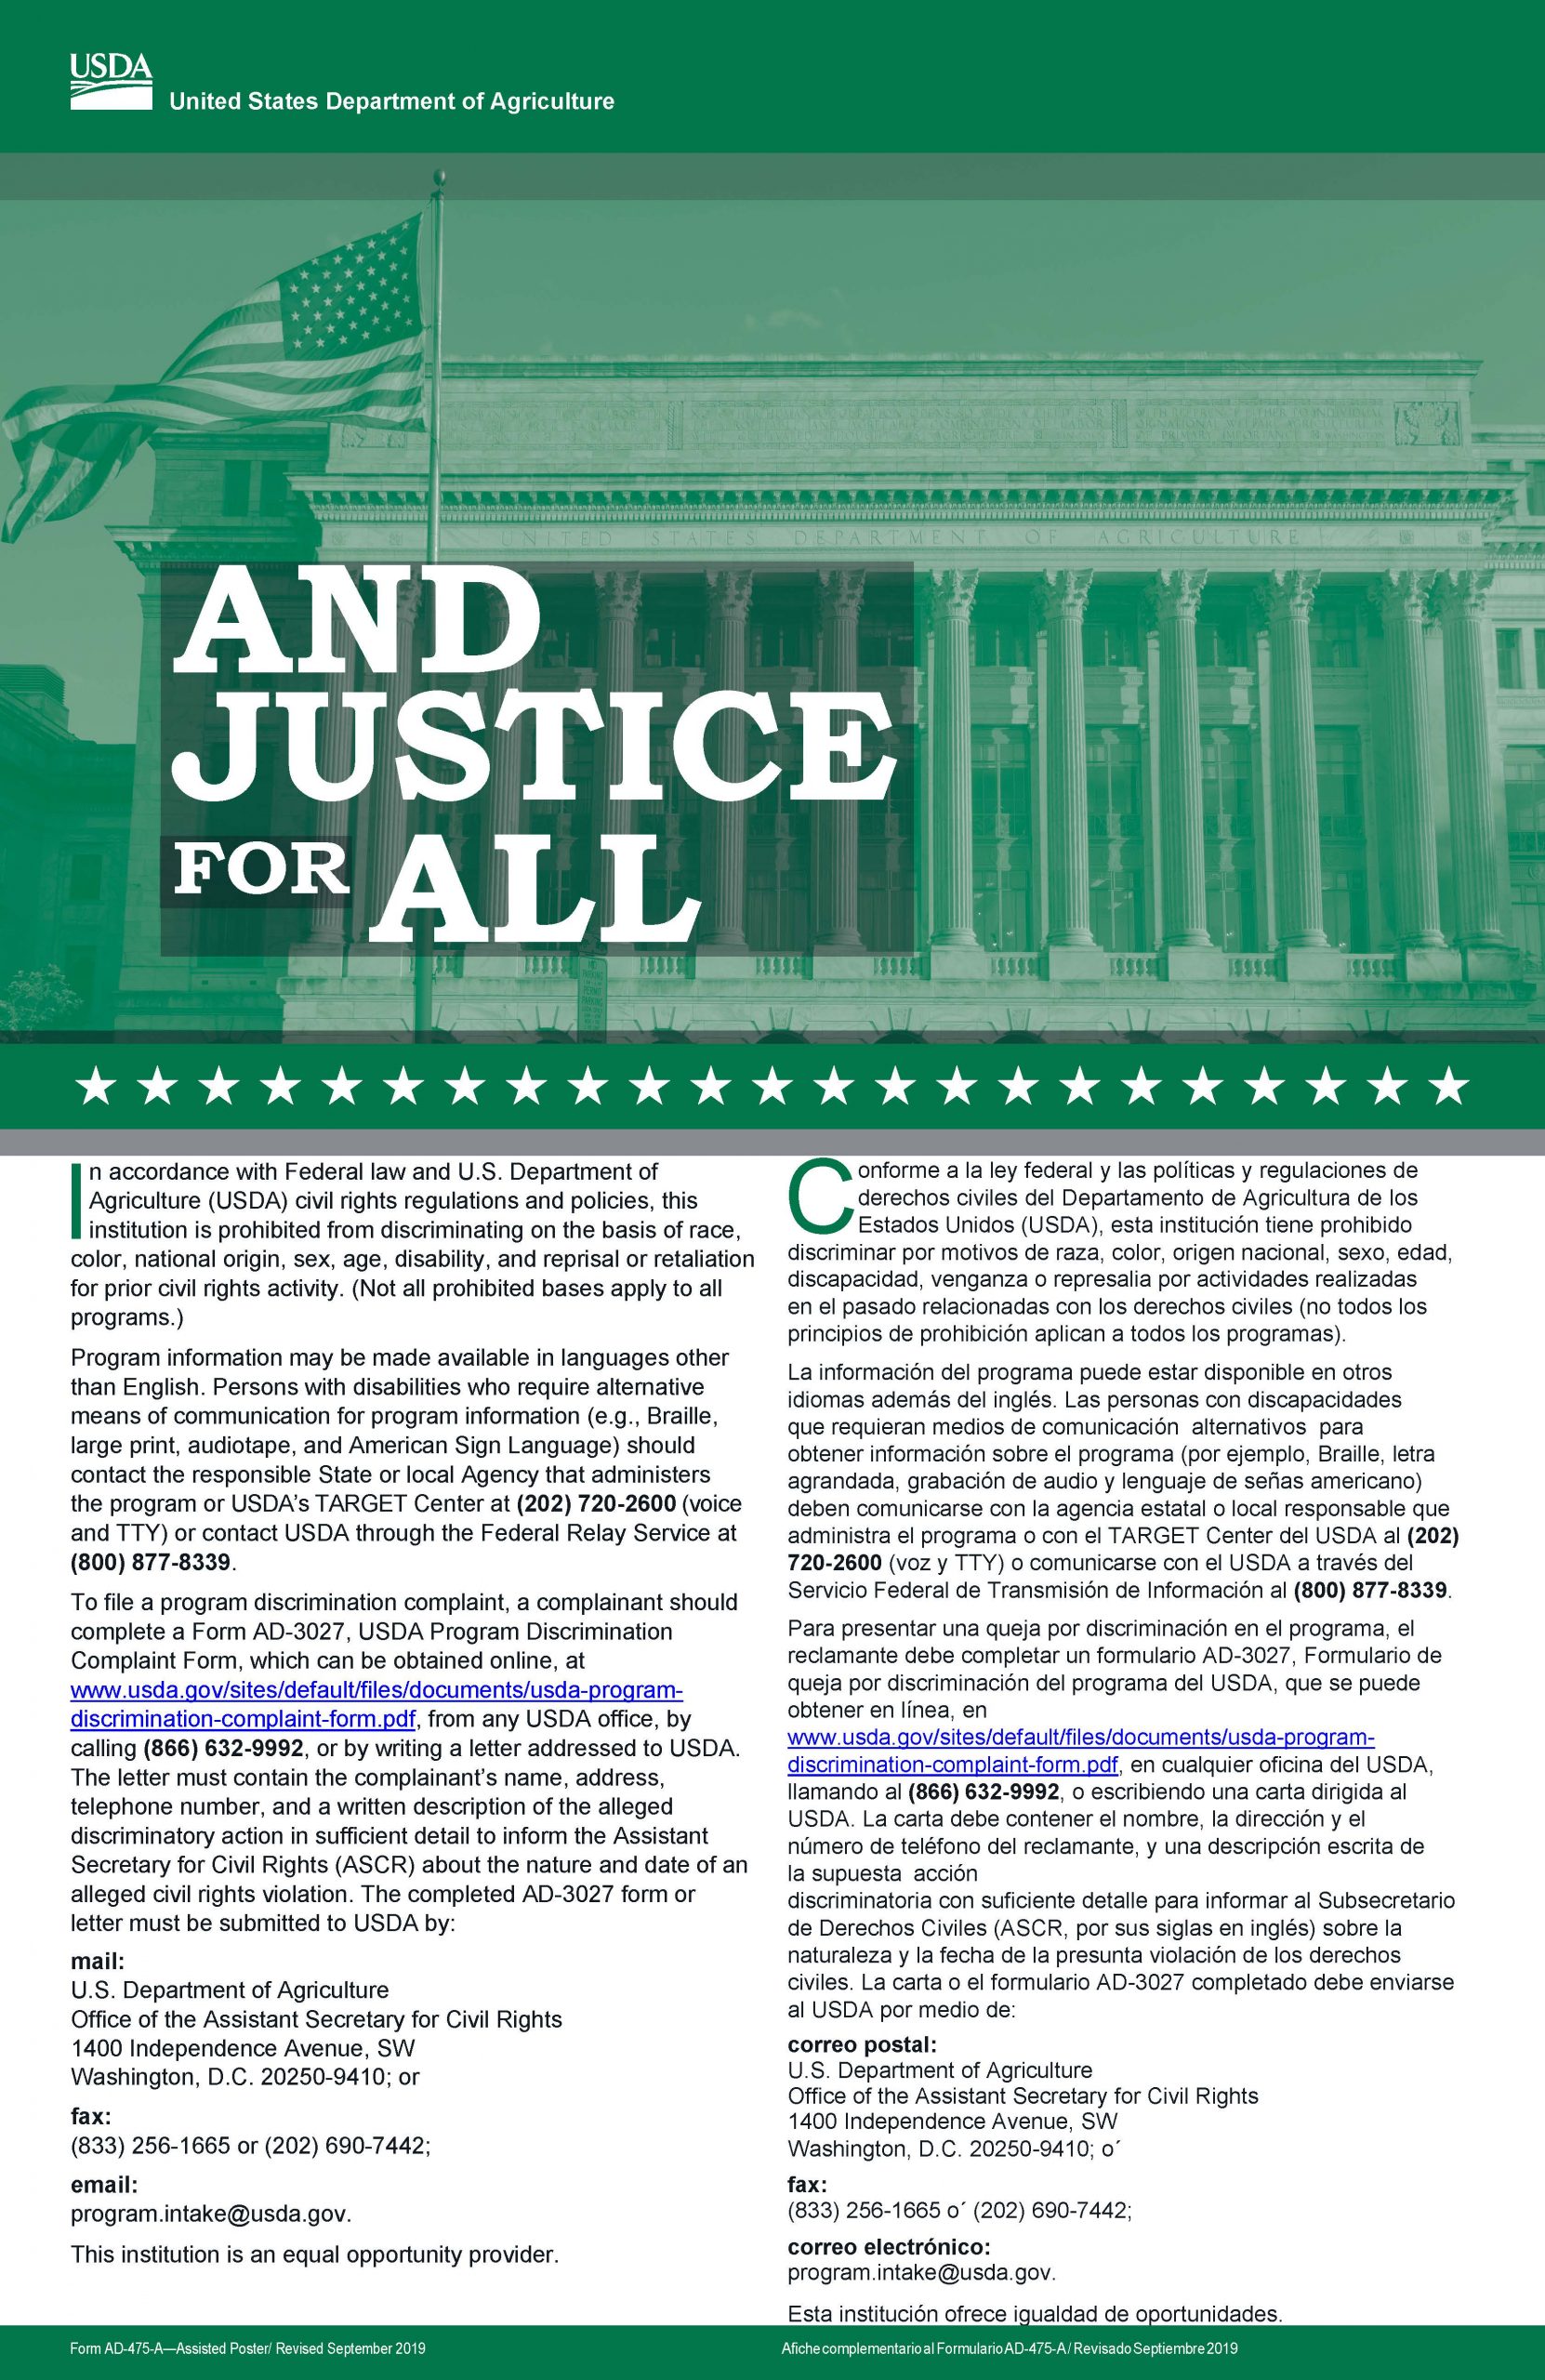 USDA Justice for All poster